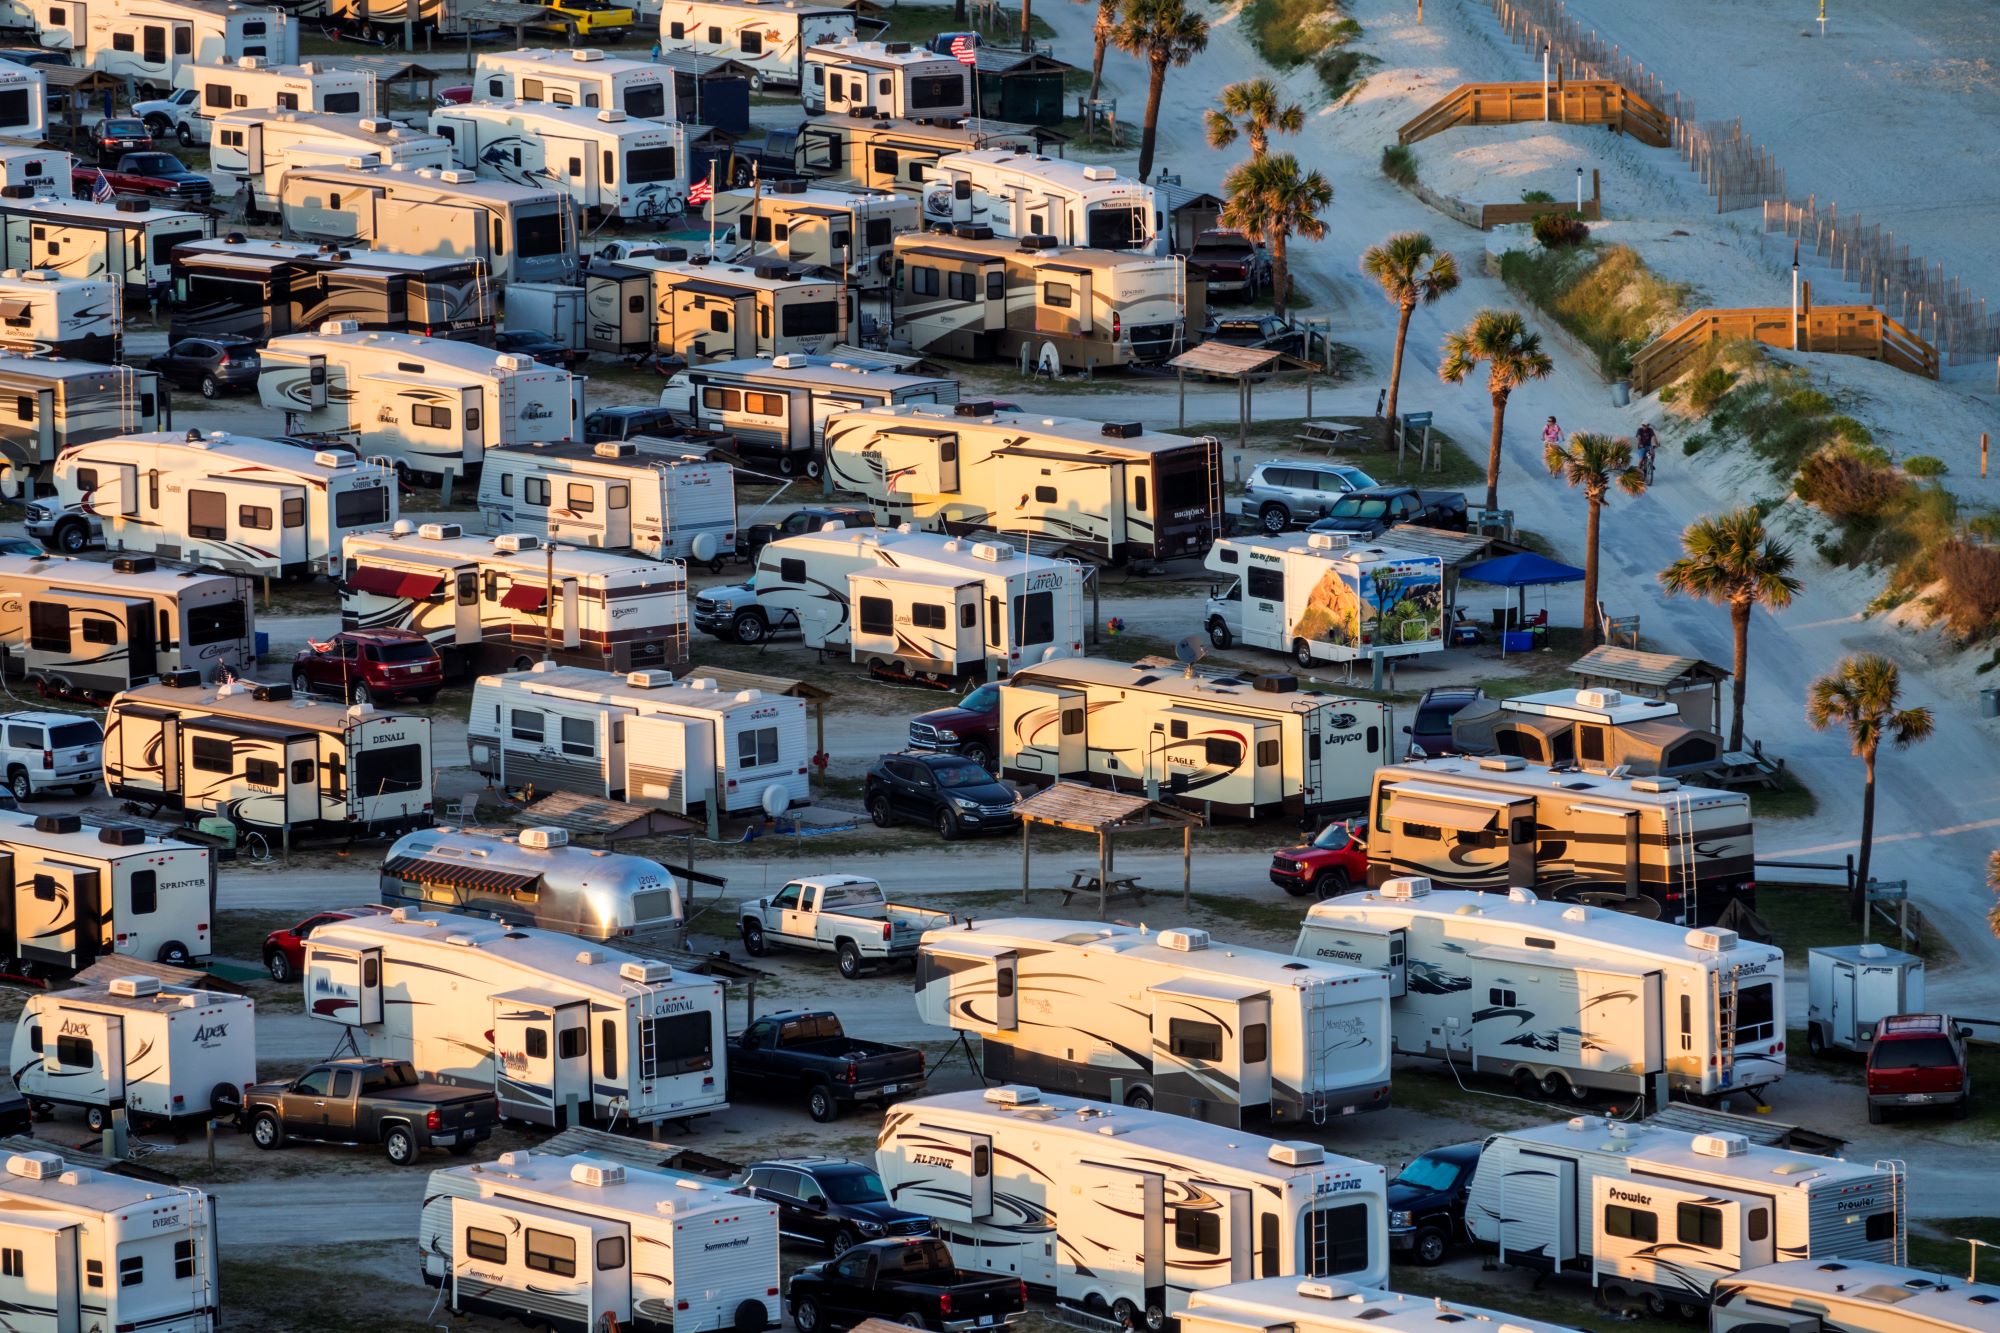 Rows of RV travel trailers next to the ocean. 